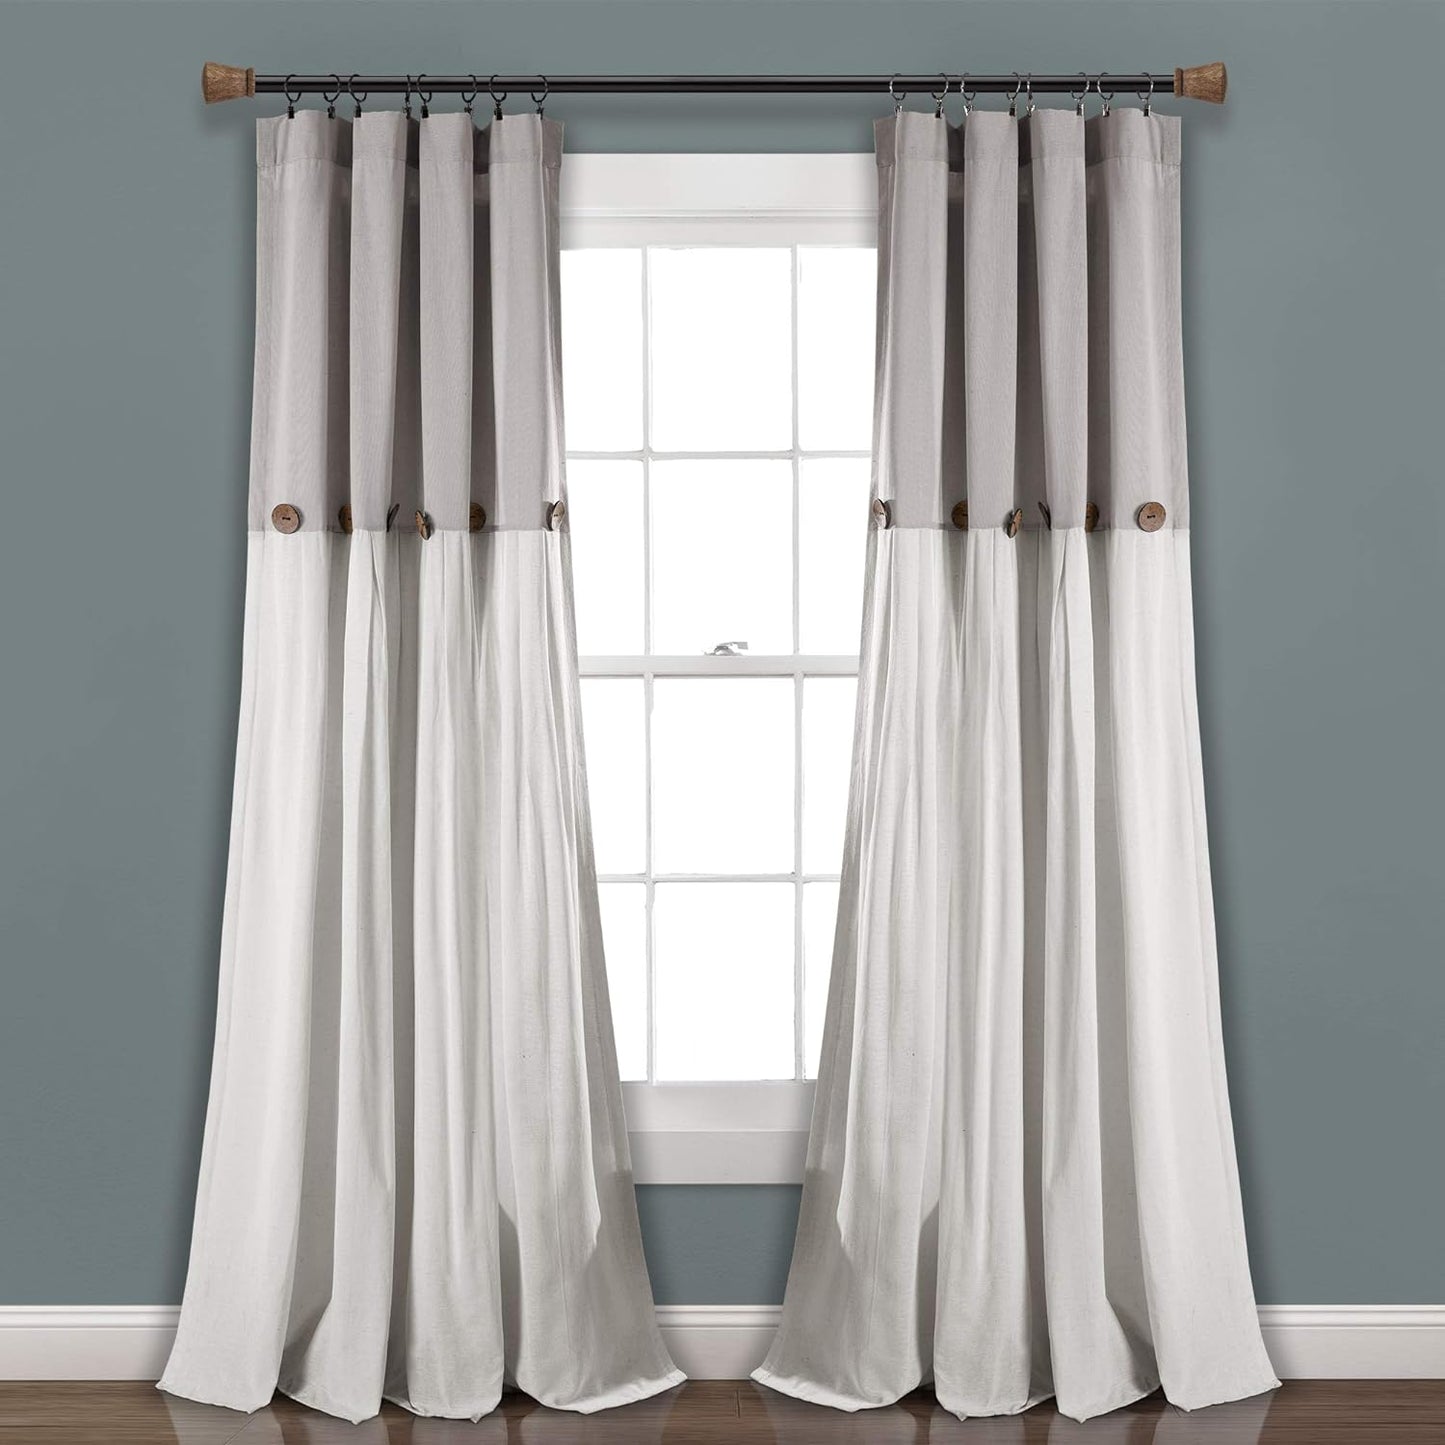 Lush Decor Linen Button Window Curtain Panel, Single, 40" W X 84" L, Linen - Country Curtains - Rustic Decor - Color Block Modern Farmhouse Curtains for Living Room, Bedroom & Dining Room  Triangle Home Fashions   